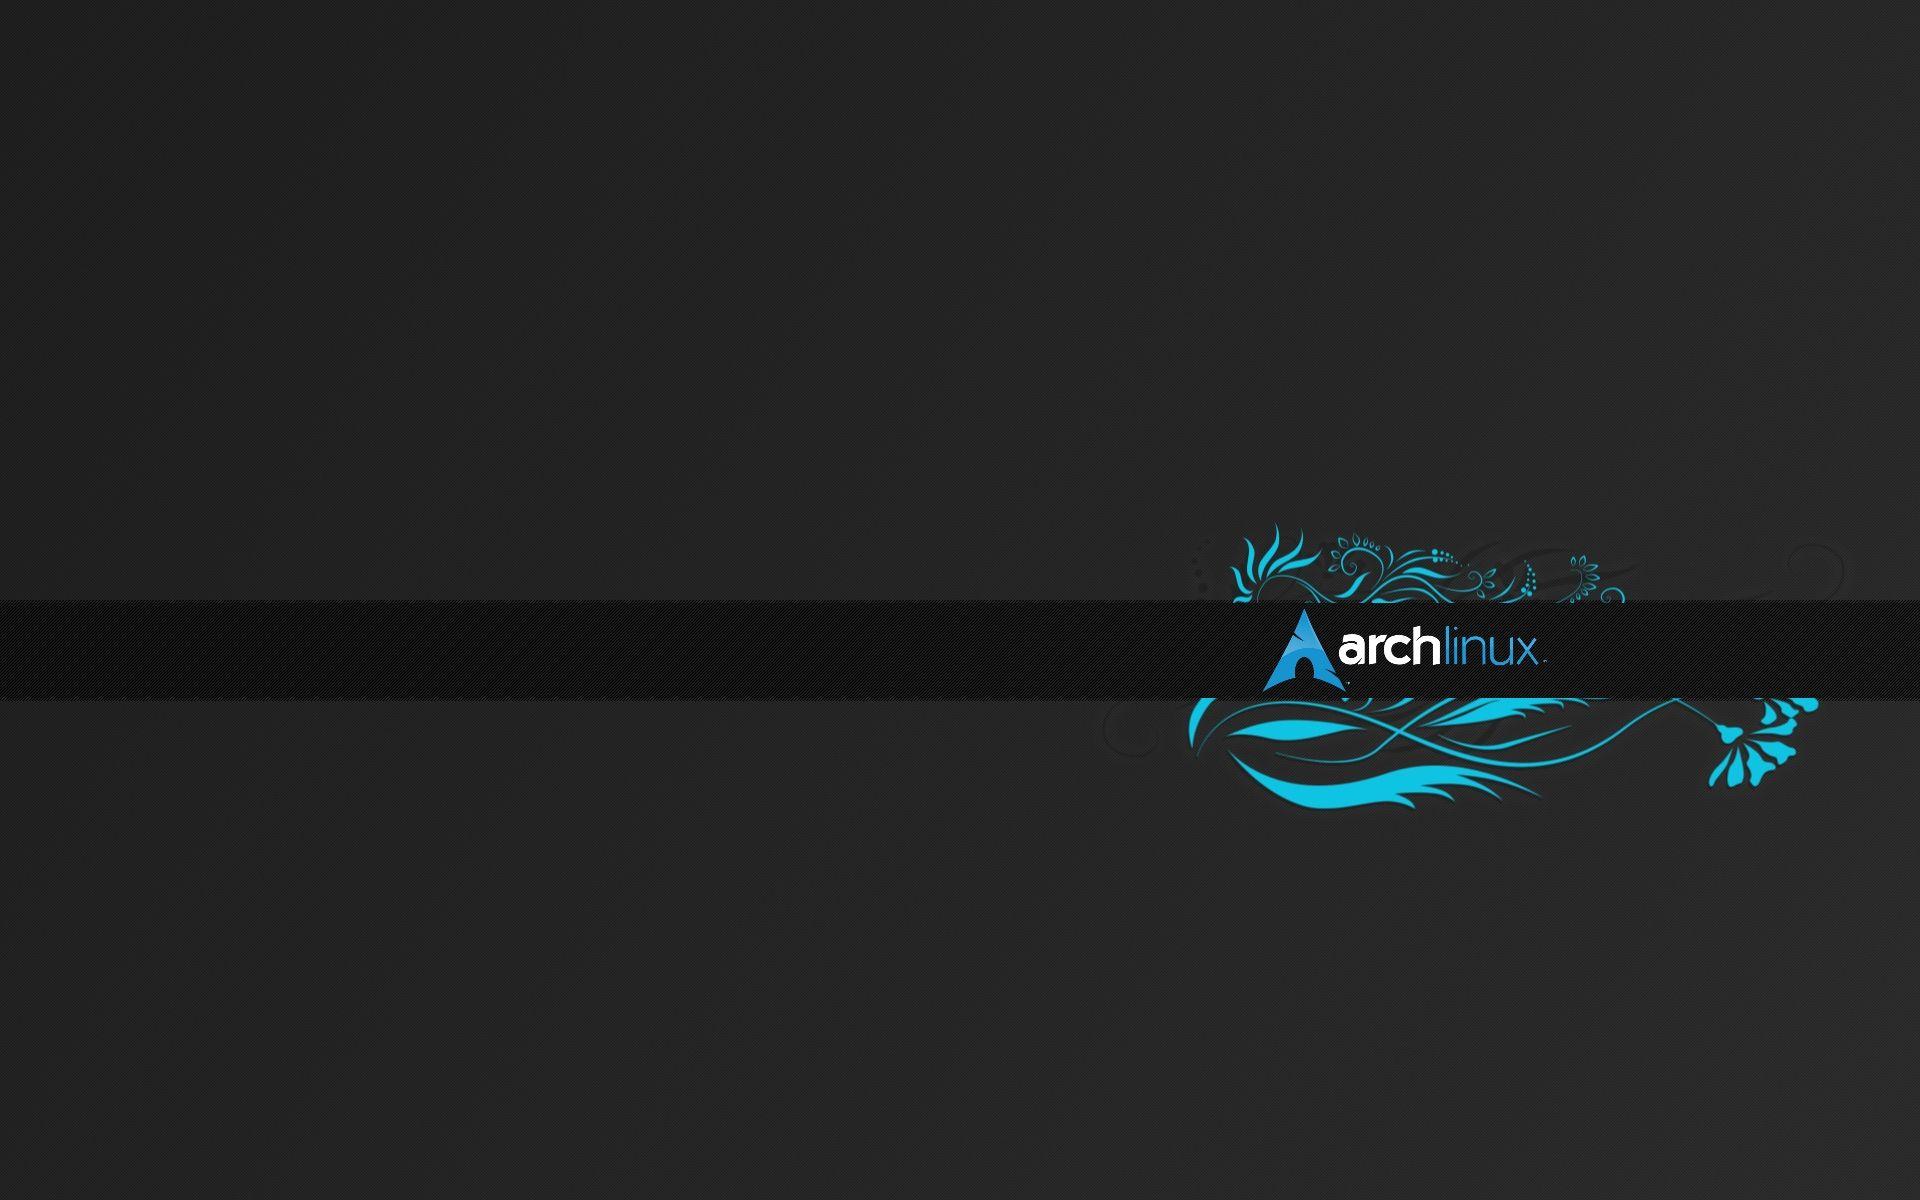 Download the Arch Linux Wallpaper, Arch Linux iPhone Wallpaper, Arch